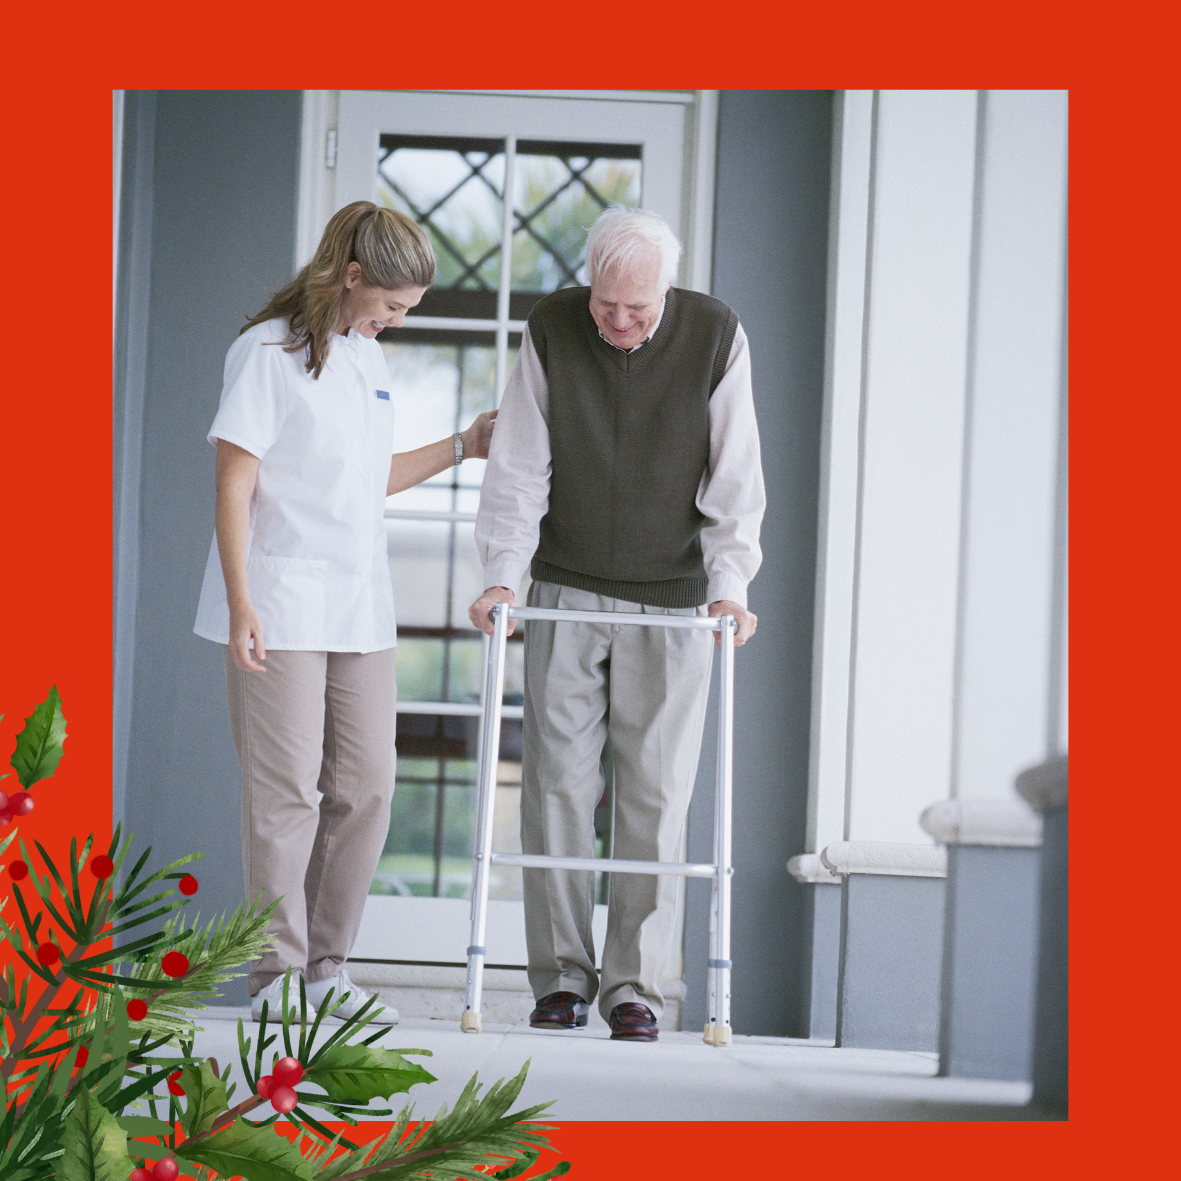 An image on a red background of a professional, who is a woman wearing a white tunic, smiling and helping an older gentleman to use a walking frame. In the corner of the image is a holly bush with red berries. 